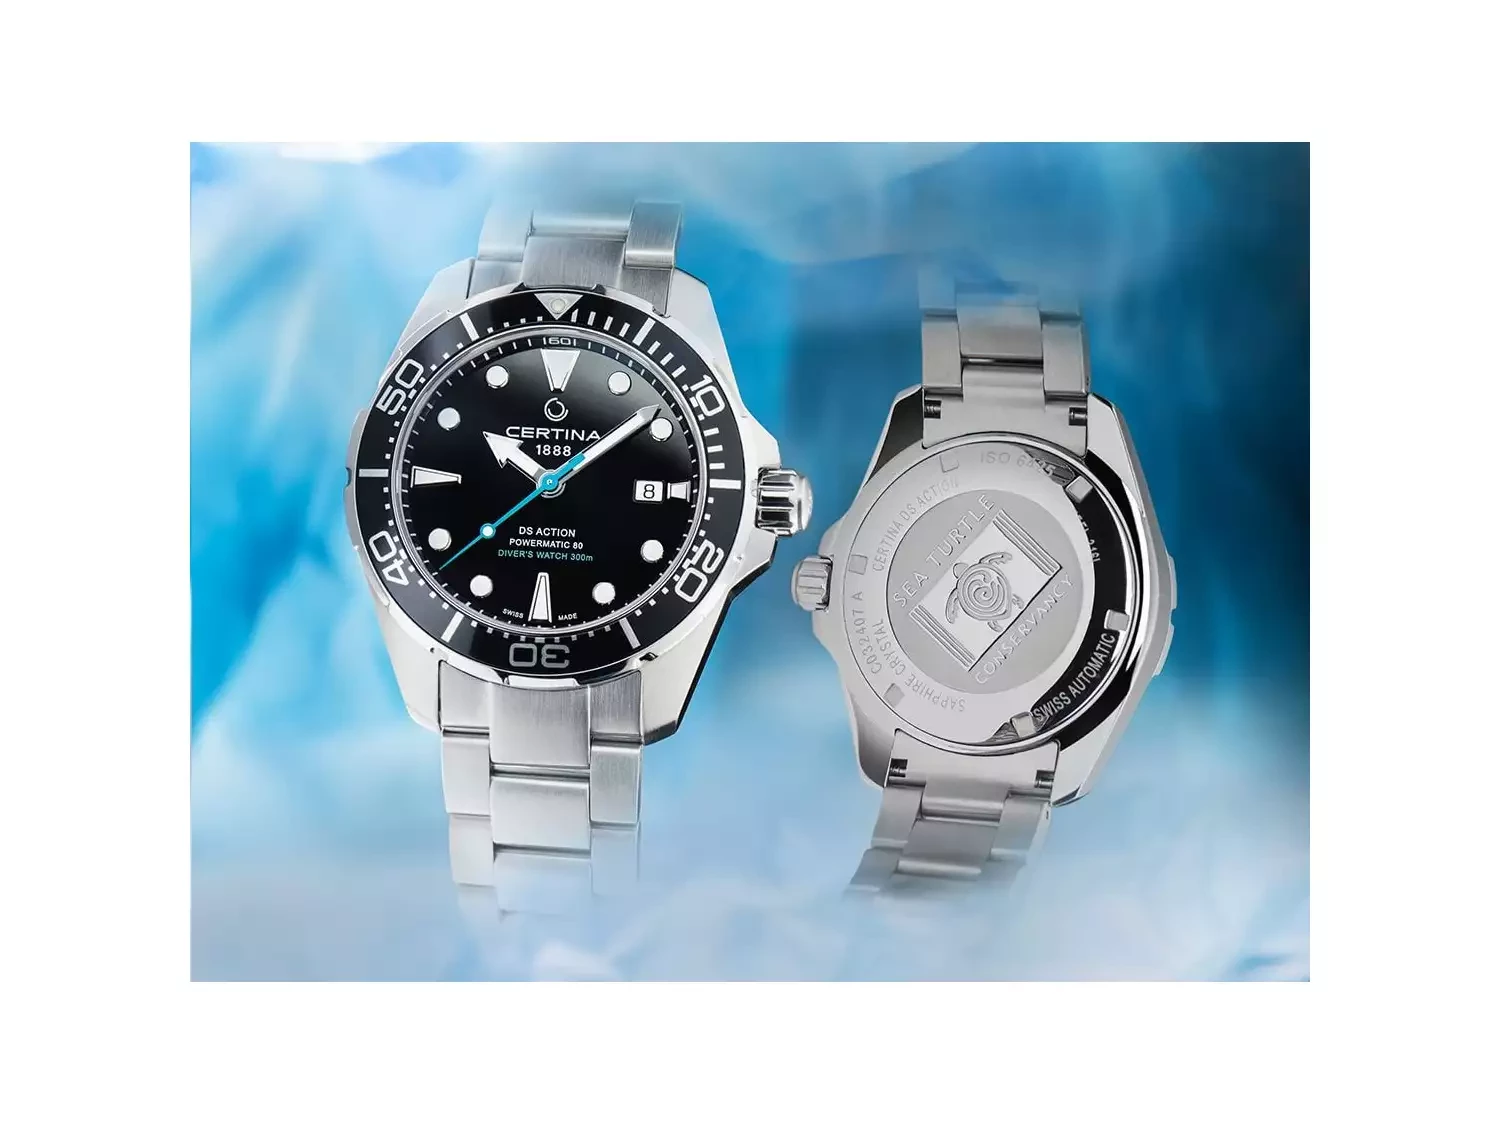 Certina - DS Action Diver